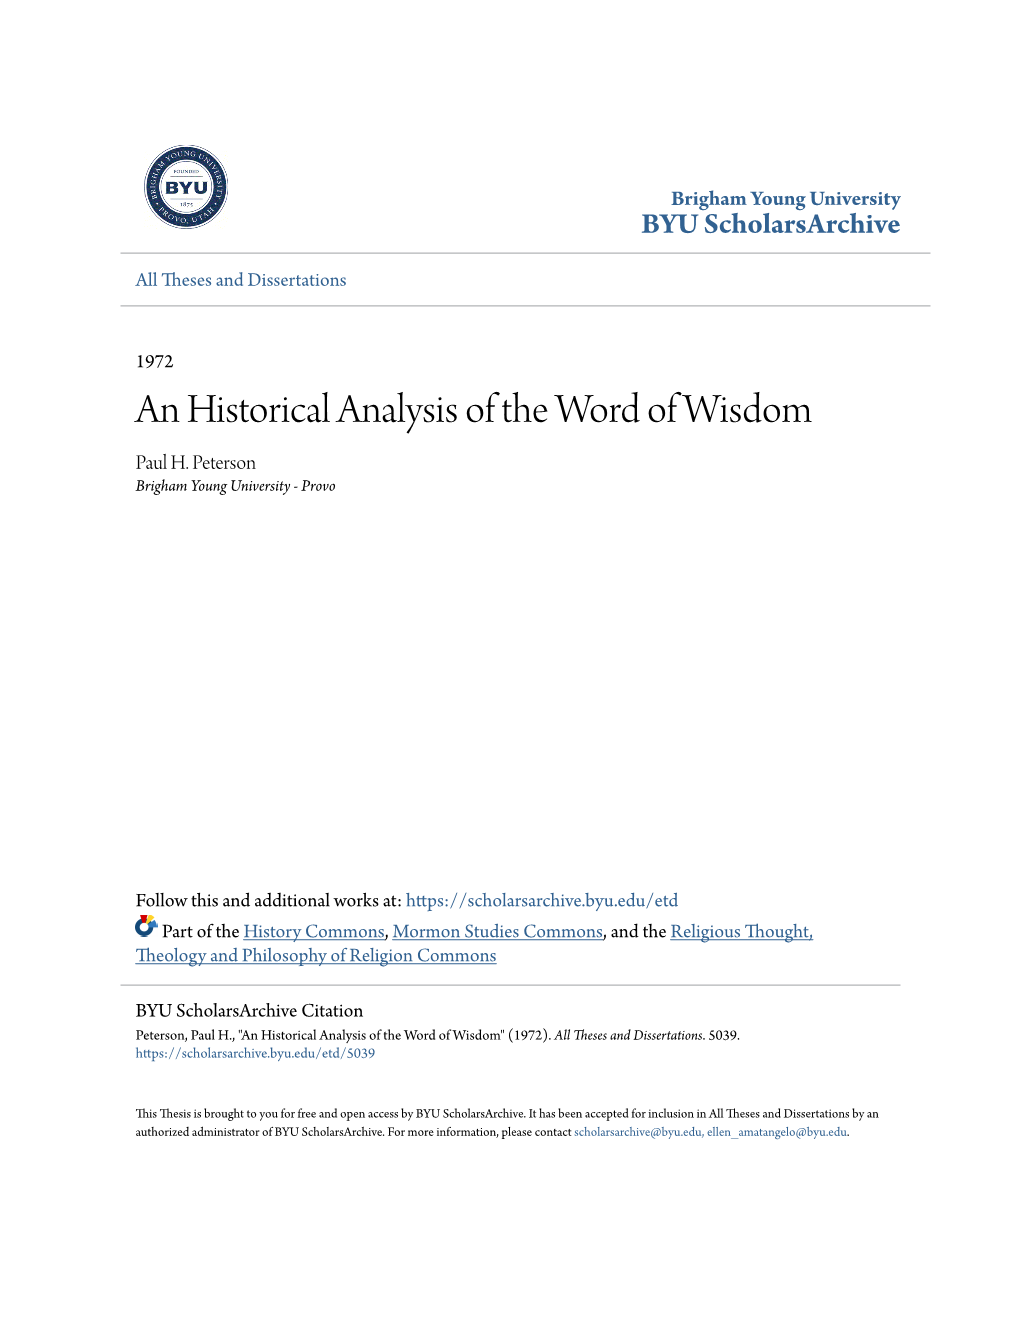 An Historical Analysis of the Word of Wisdom – Paul Peterson